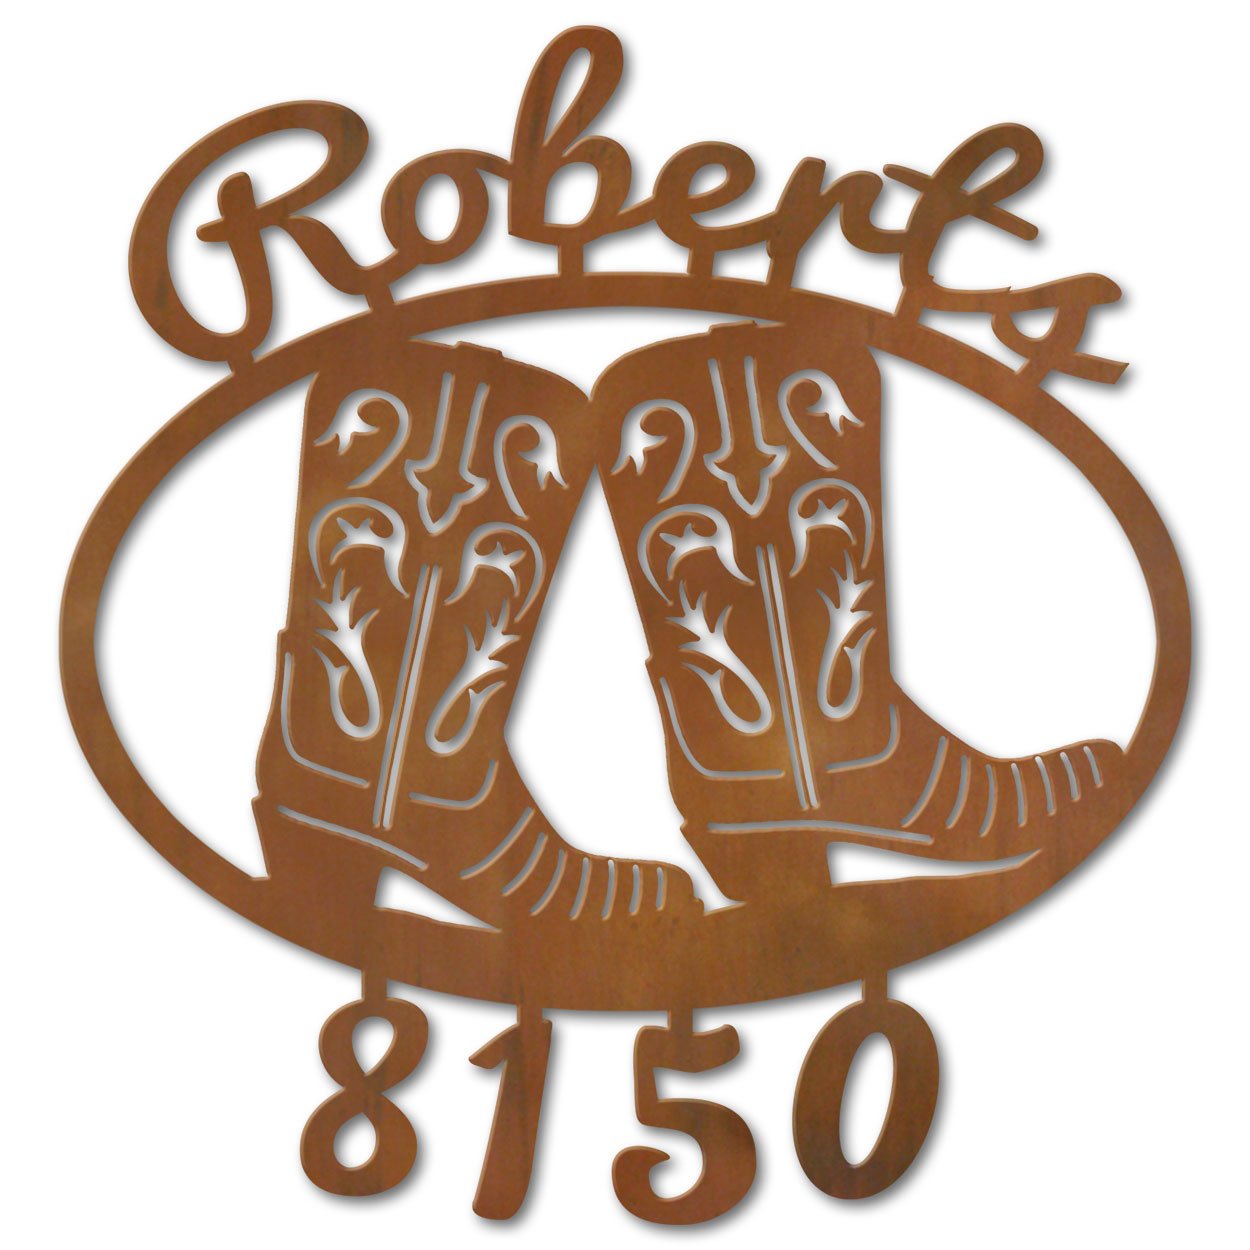 600604 - Boots Custom Name and House Numbers